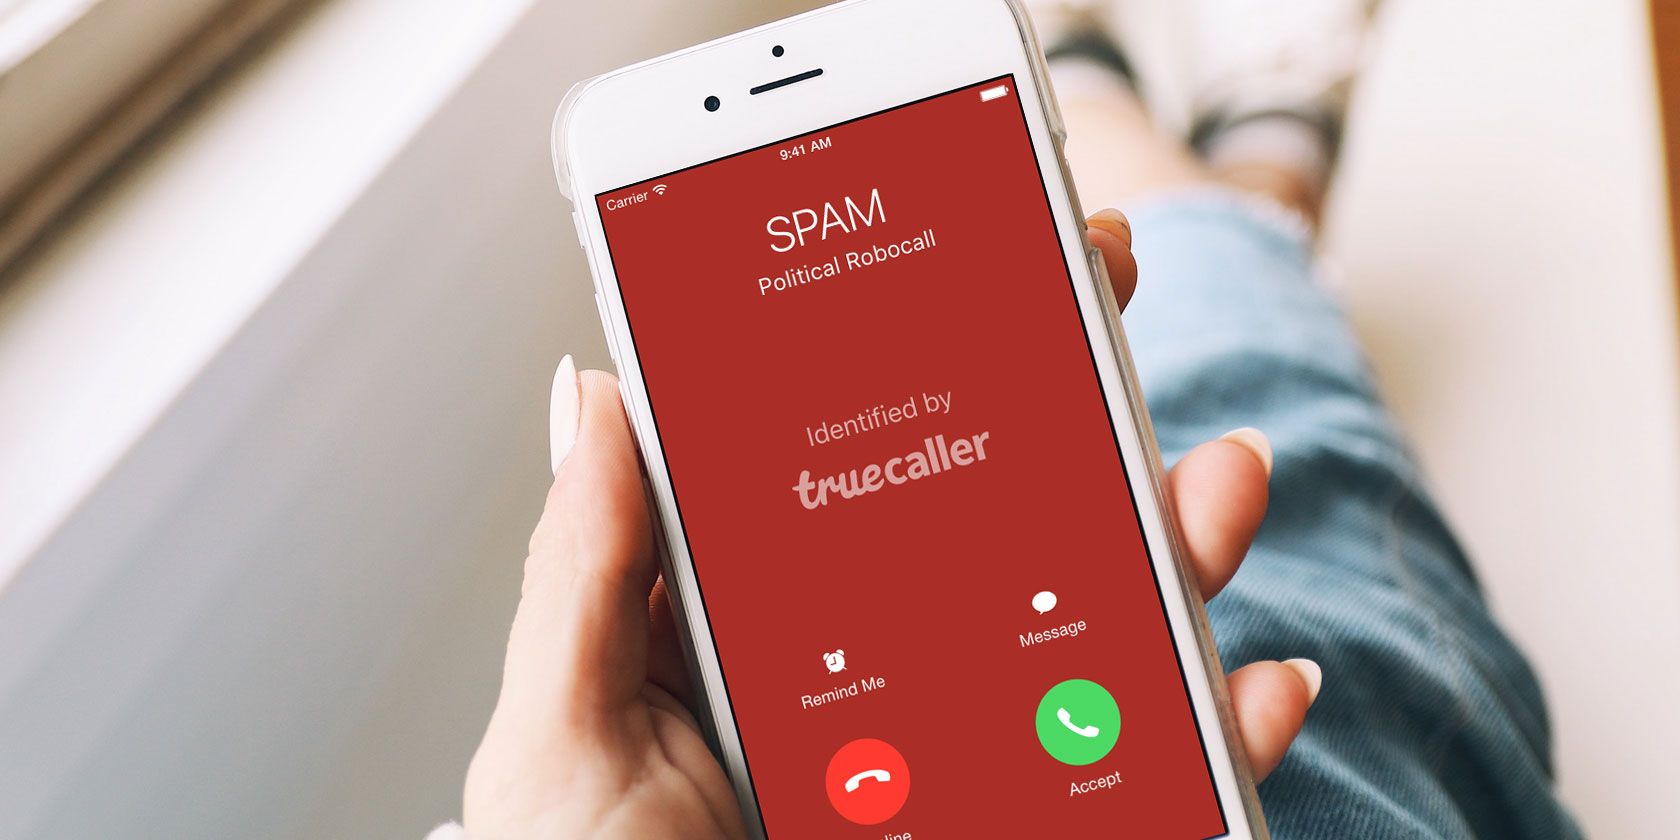 what is the use of truecaller app